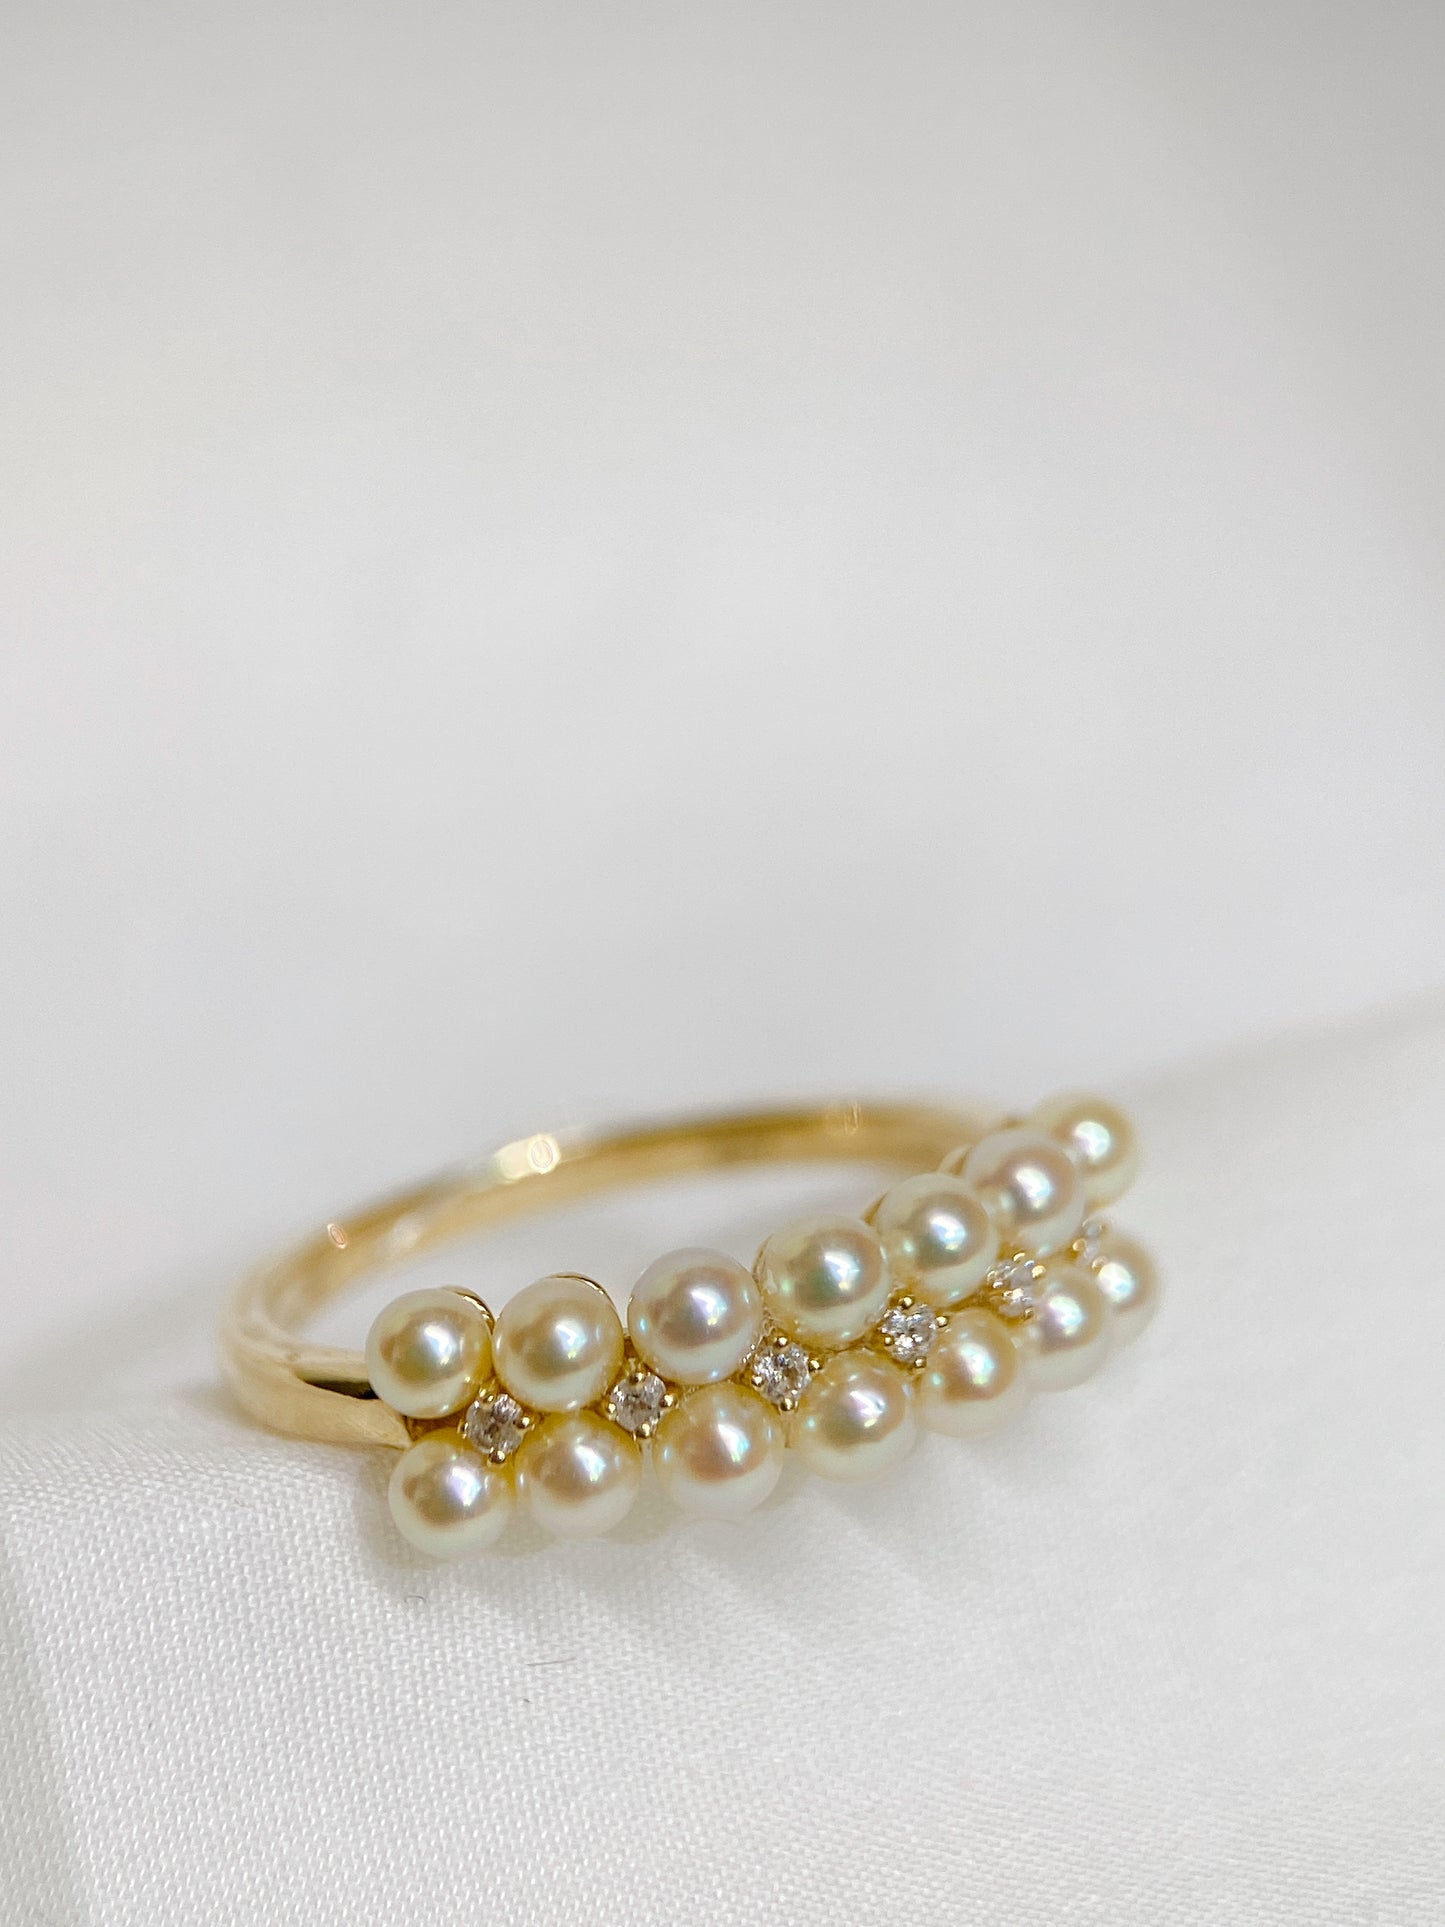 Akoya Pearl Ring in 18K Yellow Gold with Diamond d0.05ct,3-3.5mm